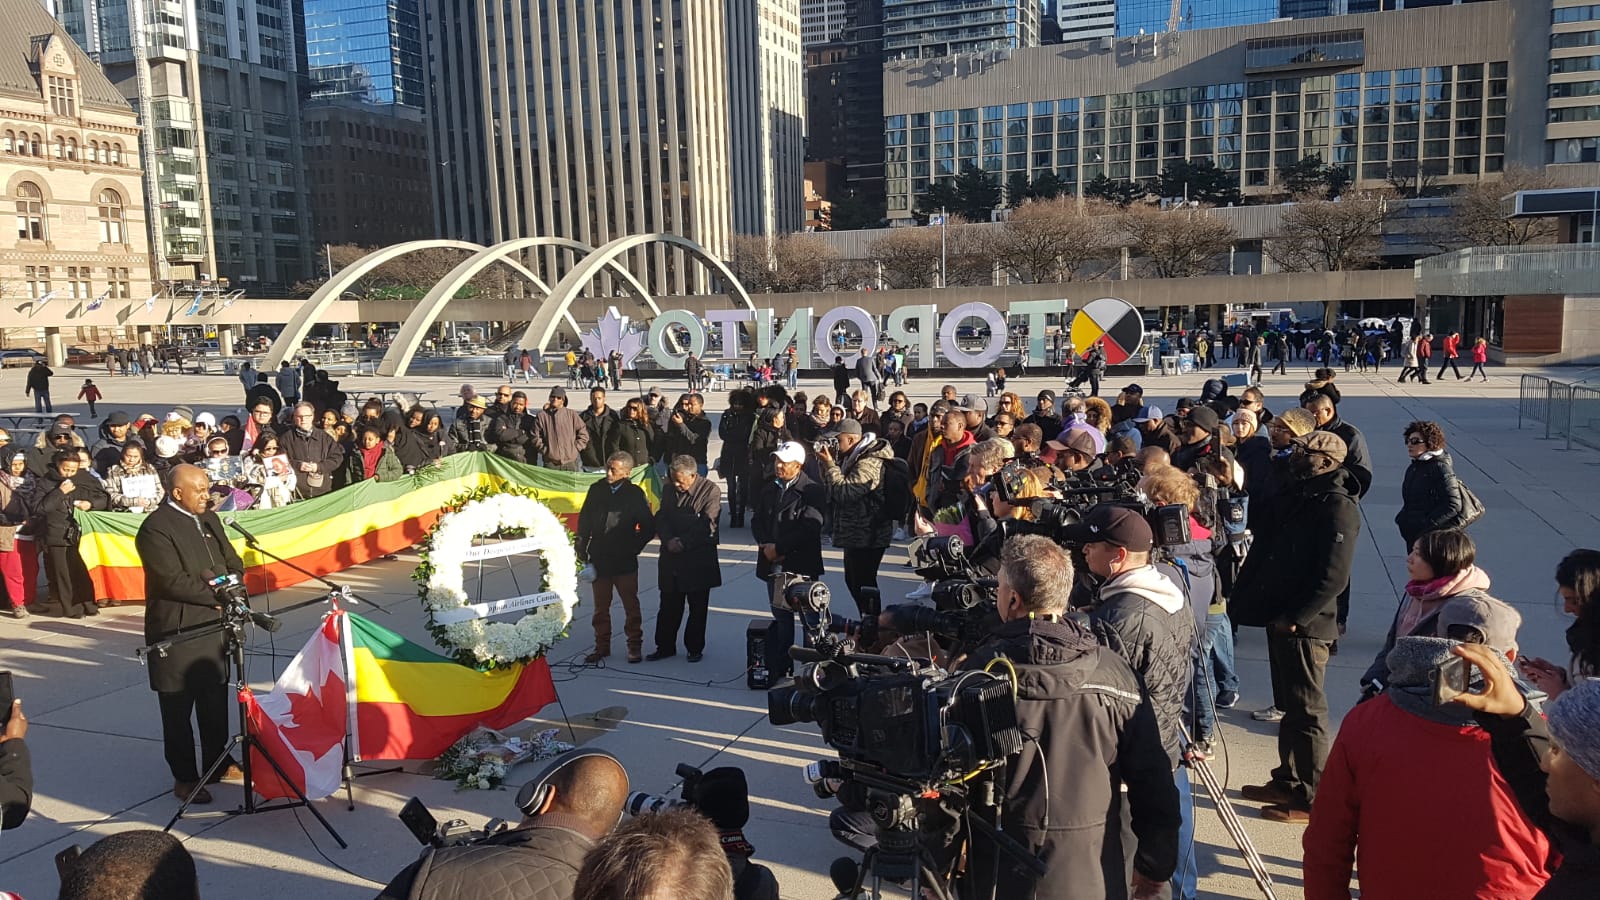 Toronto Paid Respect To The Boeing 737 Max 8 Crash victims in Ethiopia